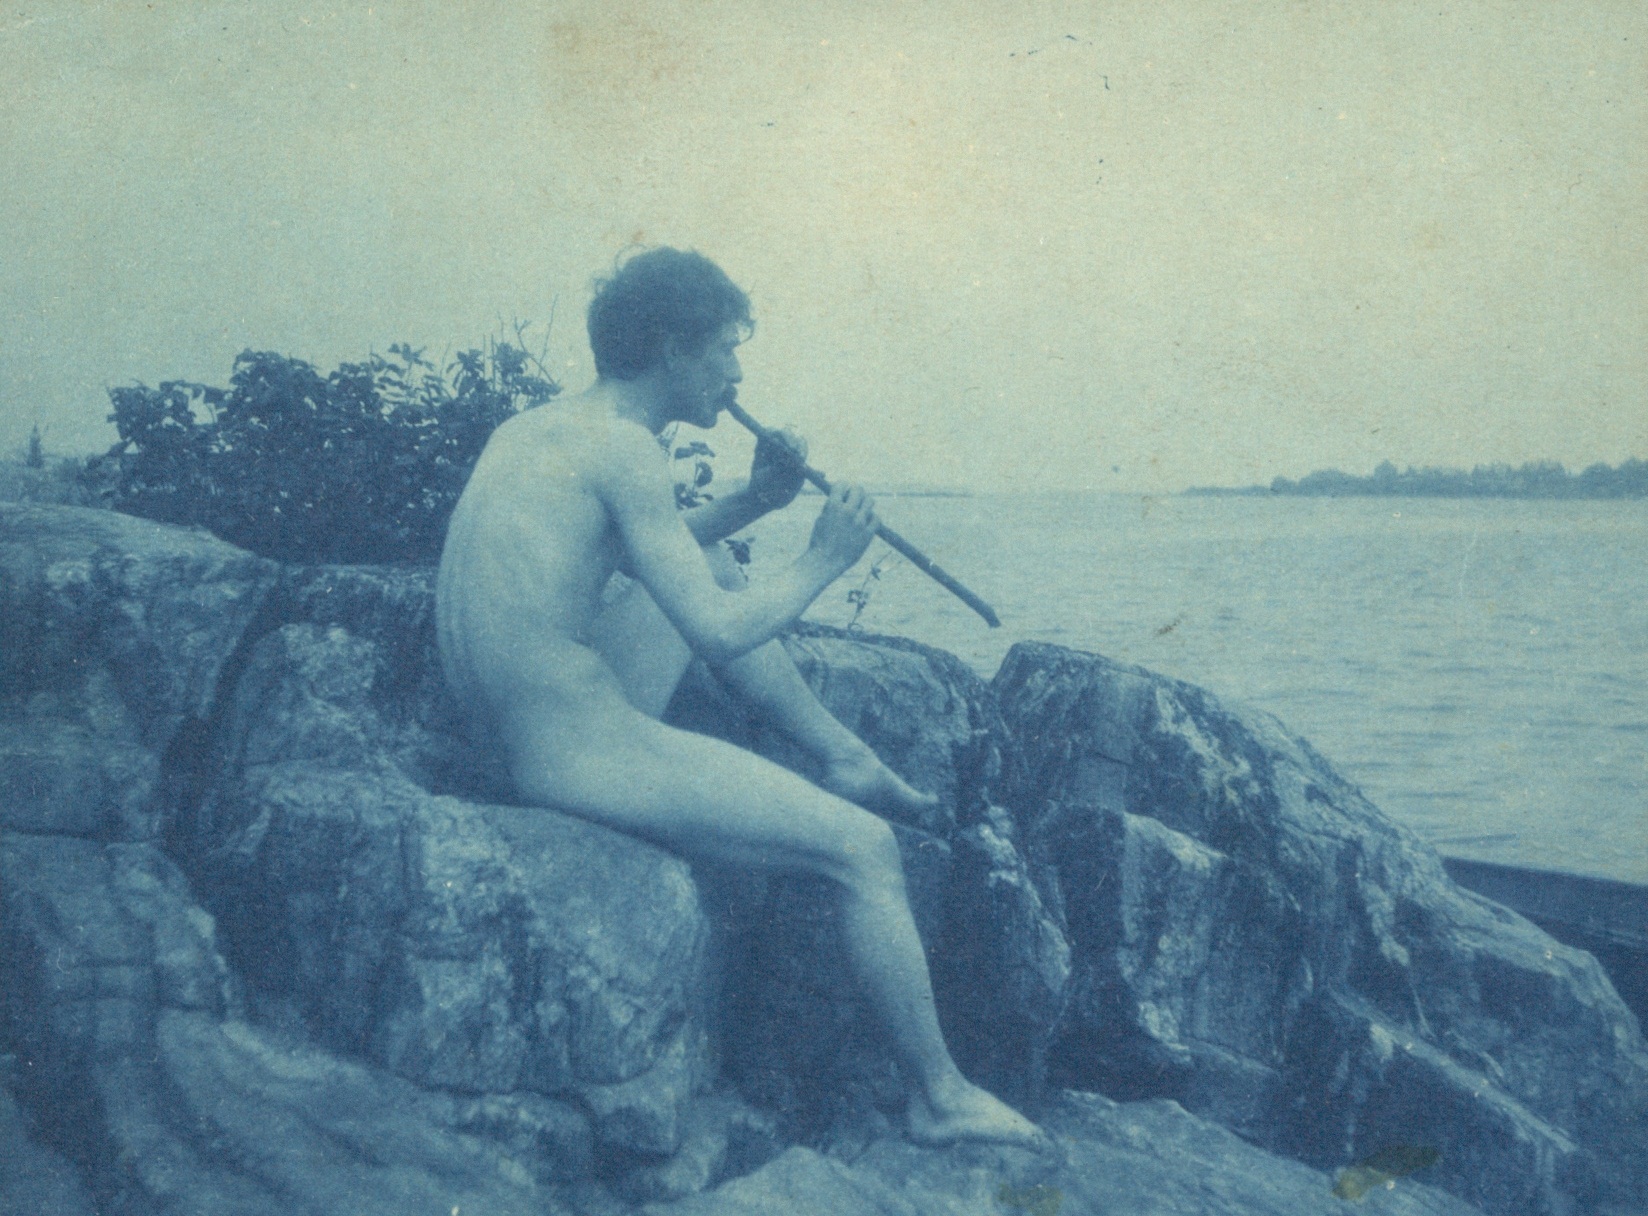 Man posed on rocks nude playing pipe Pan photograph by Frances Benjamin Johnston